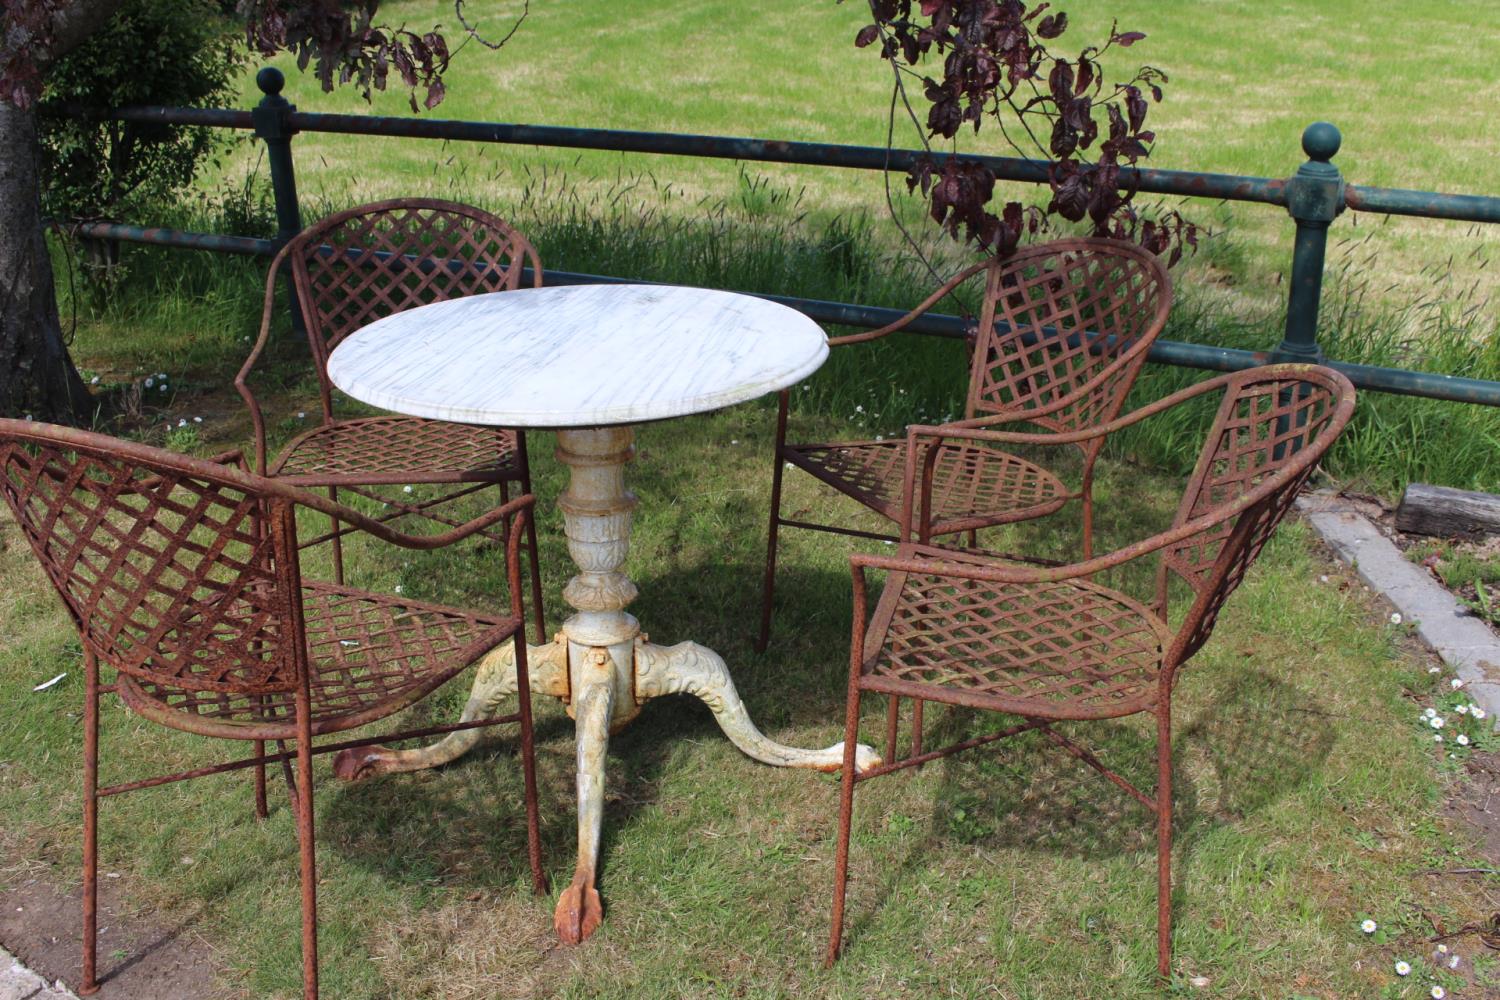 Cast iron garden table and four chairs.